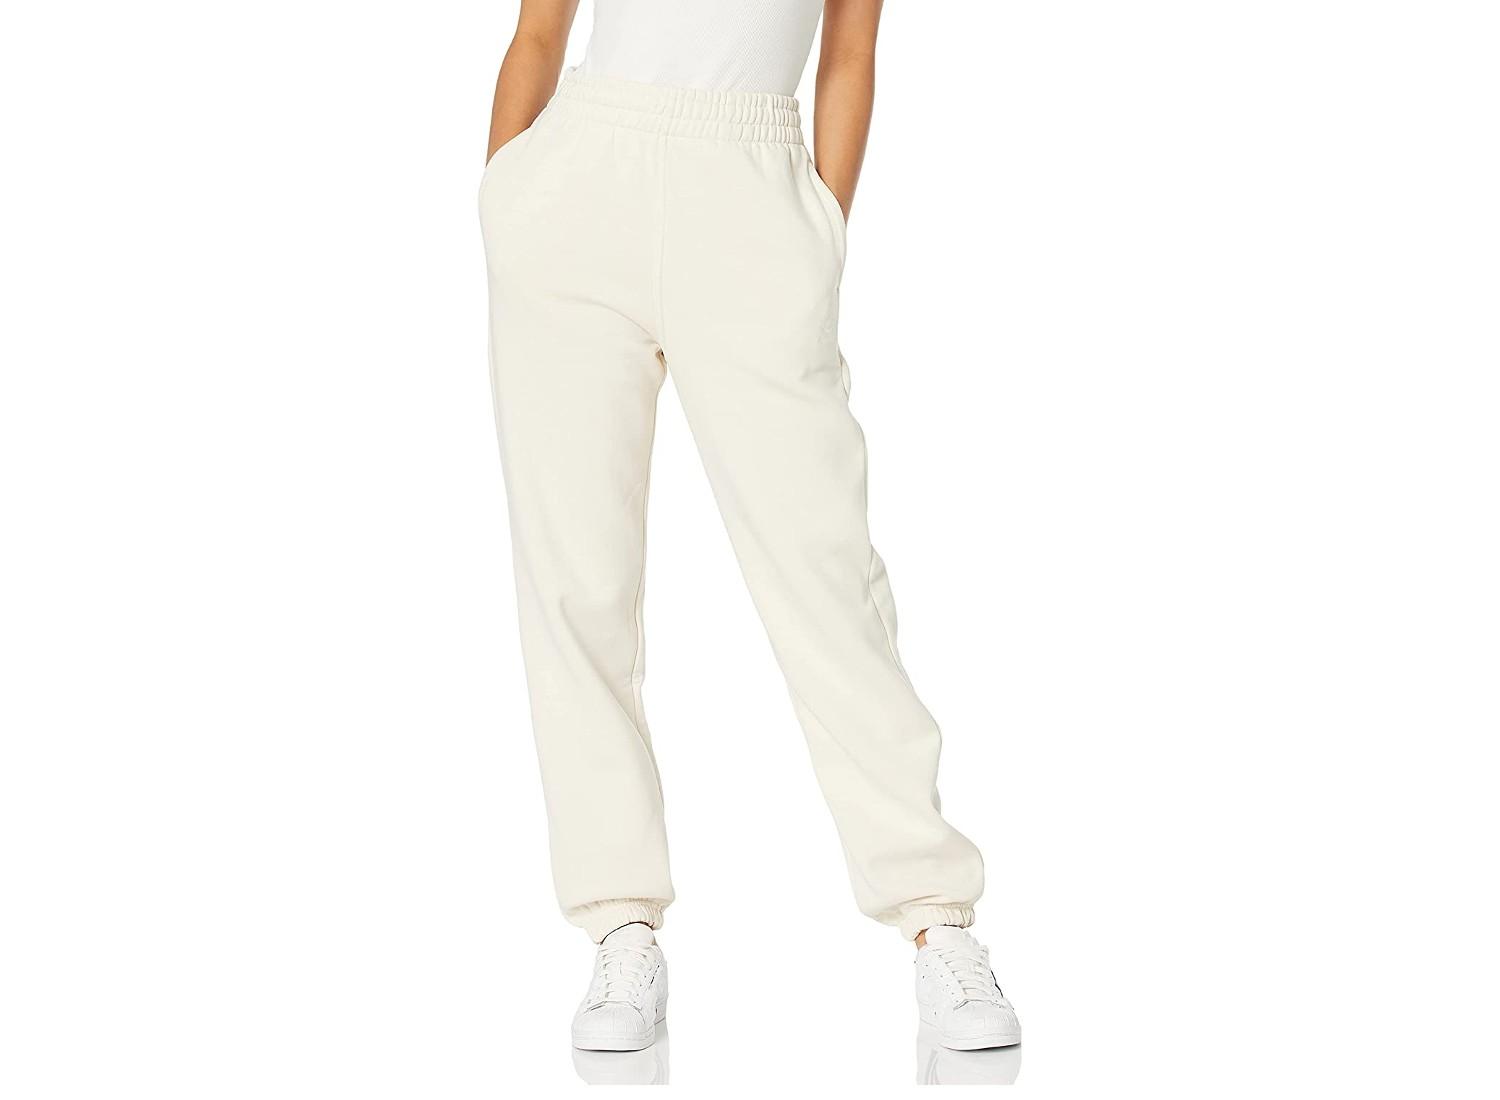 A pair of wonder white Adidas women's joggers.